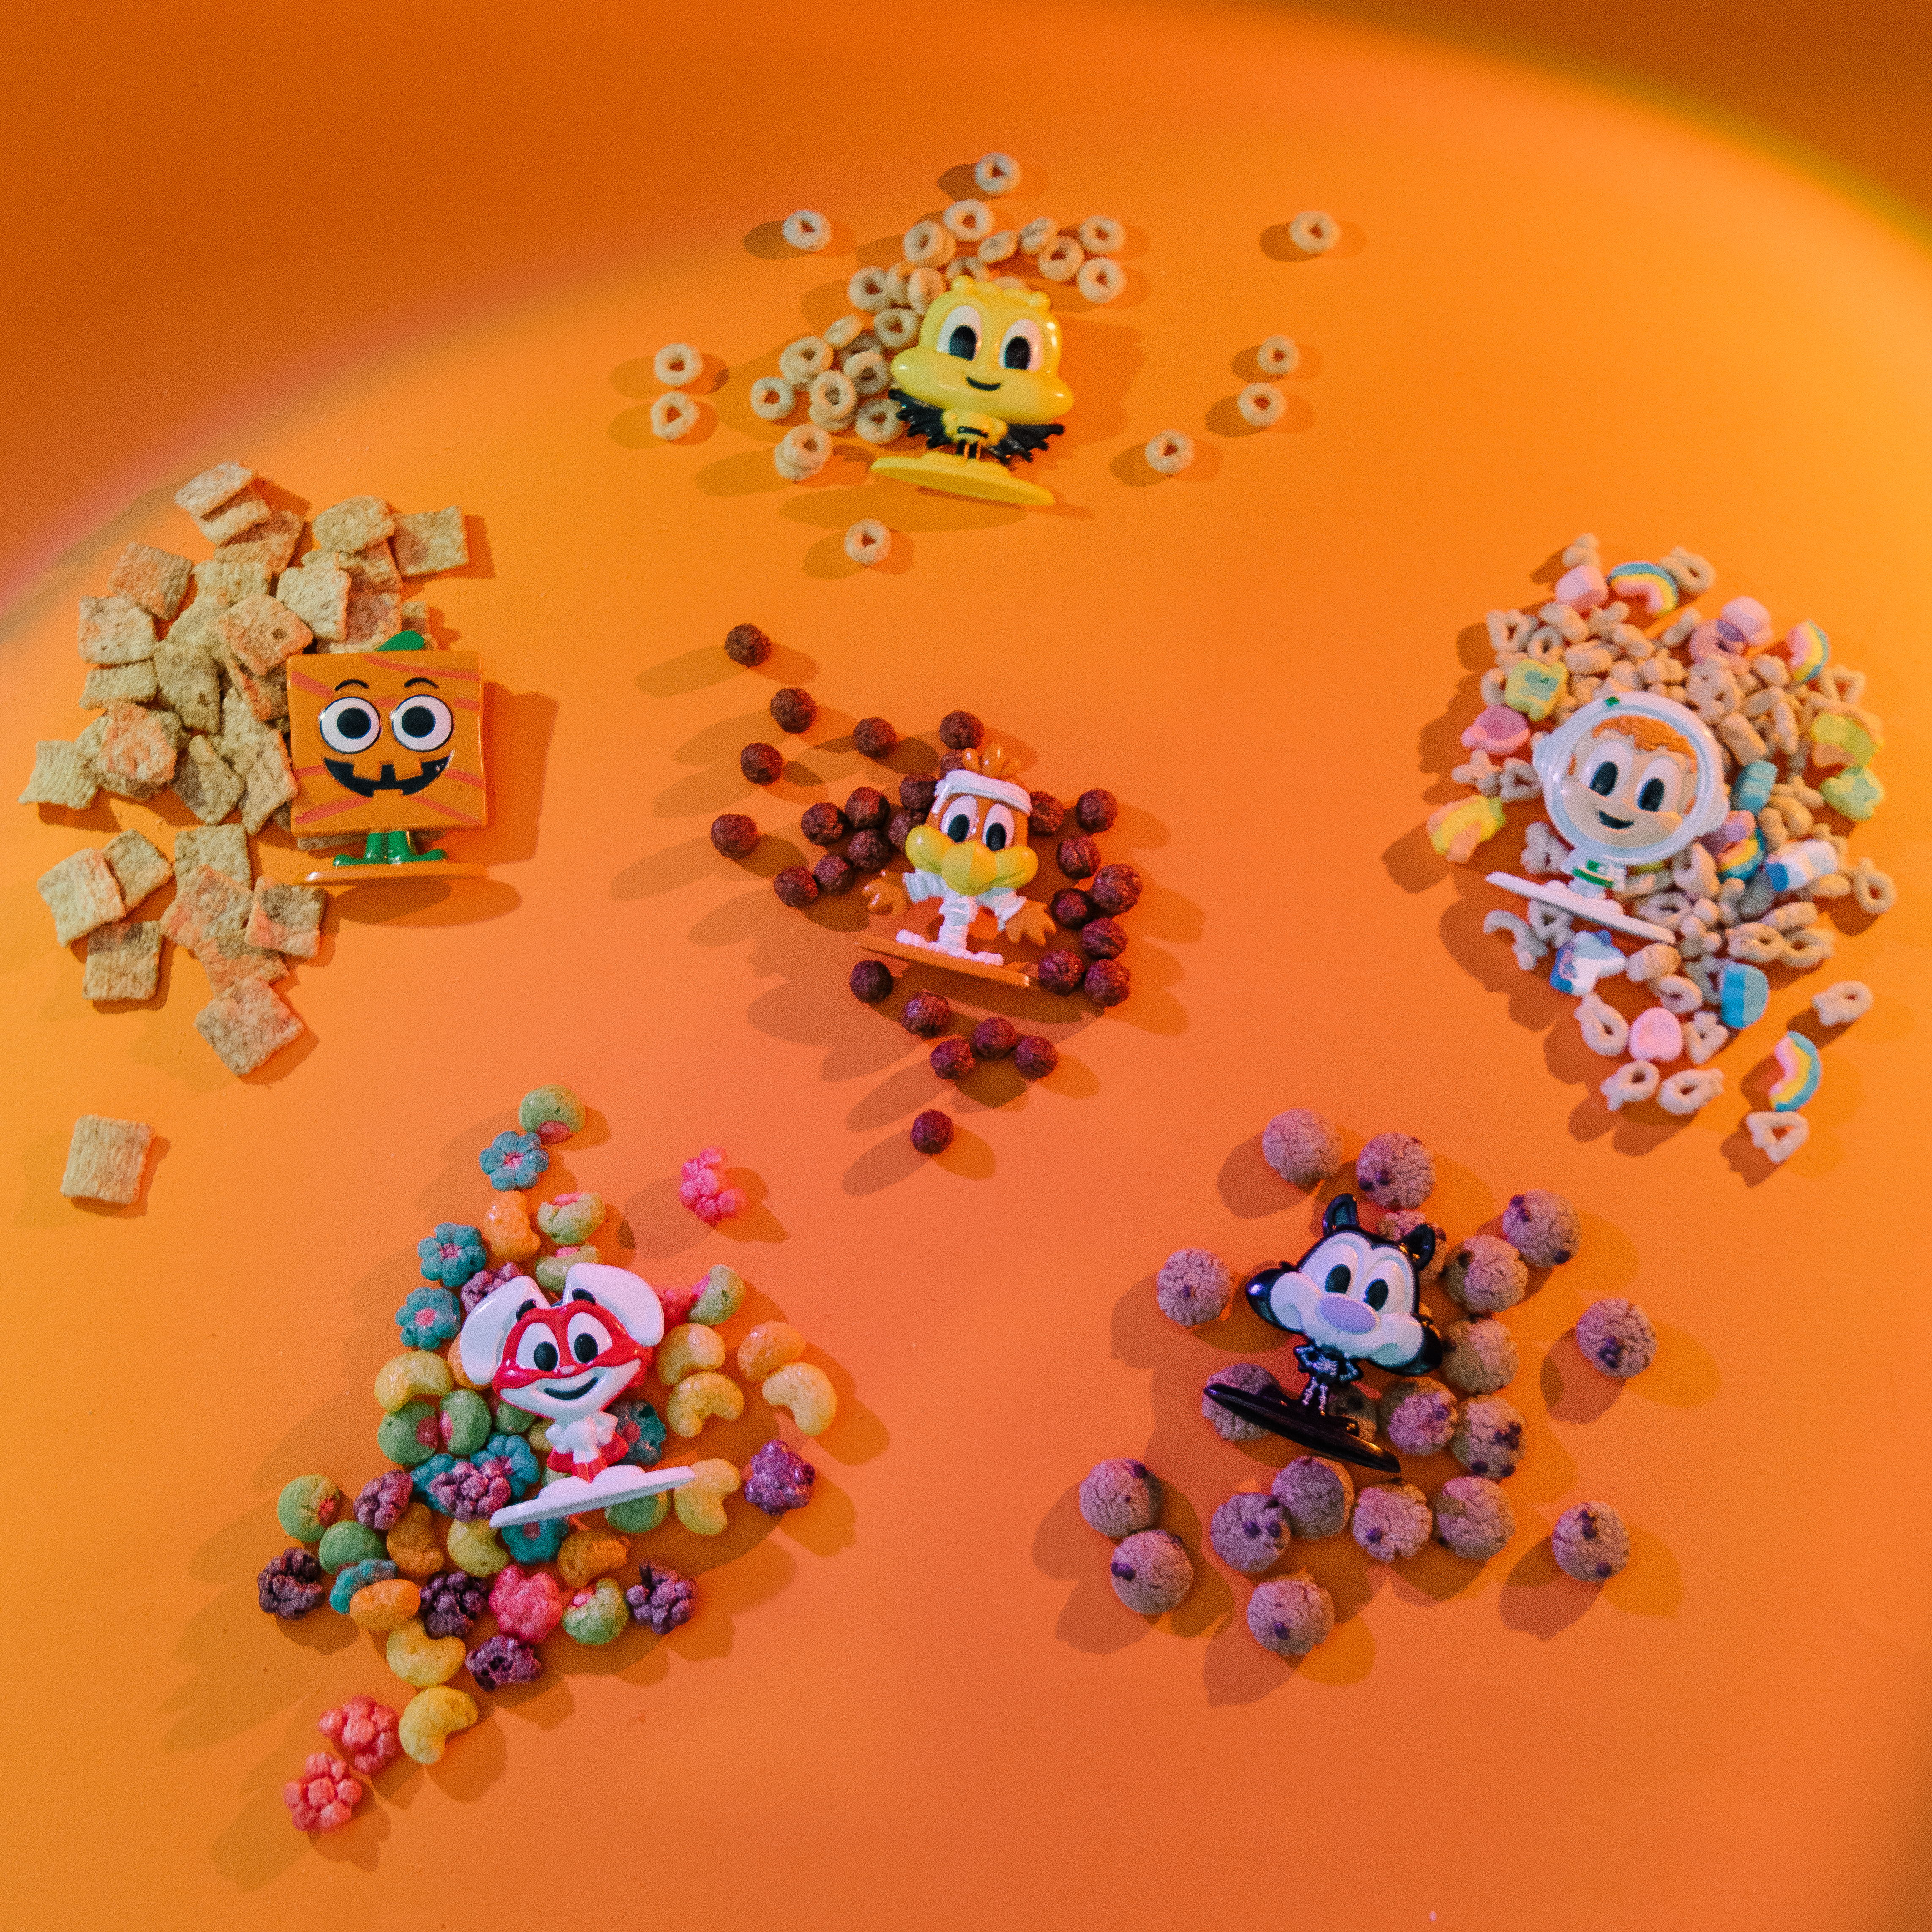 Cereal Squad toys laying on piles of cereal